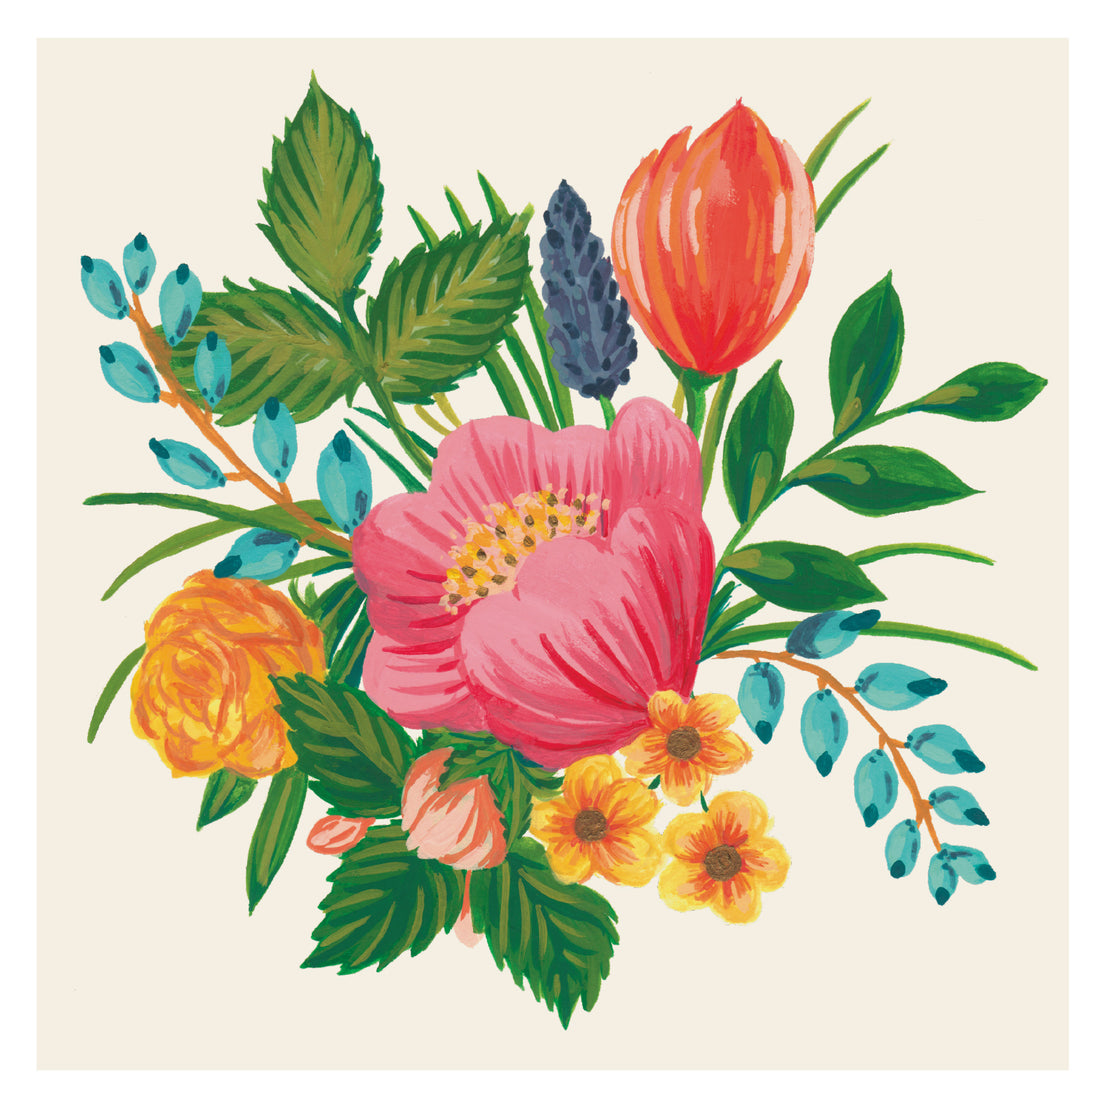 A square cocktail napkin featuring whimsical, illustrated blossoms in pink, red, blue and orange, with green leaves, centered on a white background.